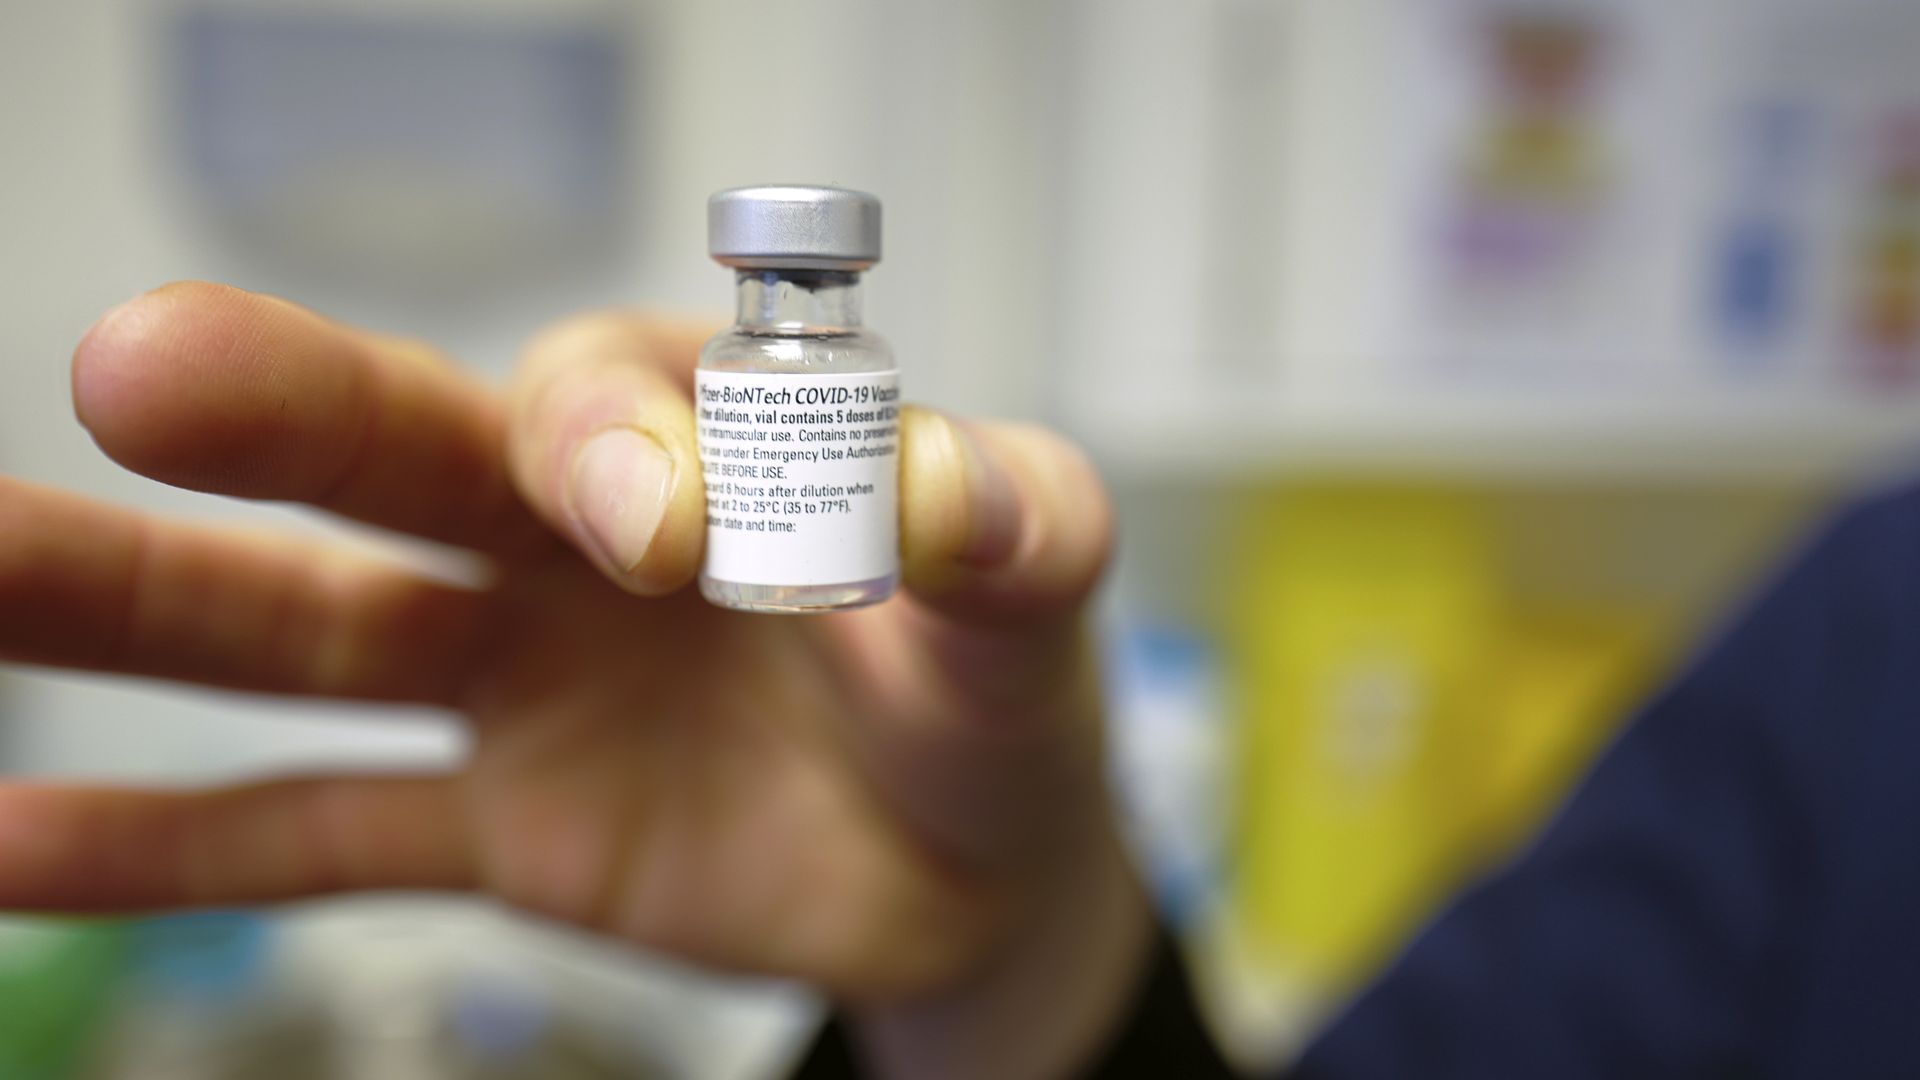 A hand holds a vial of the COVID vaccine up to the camera